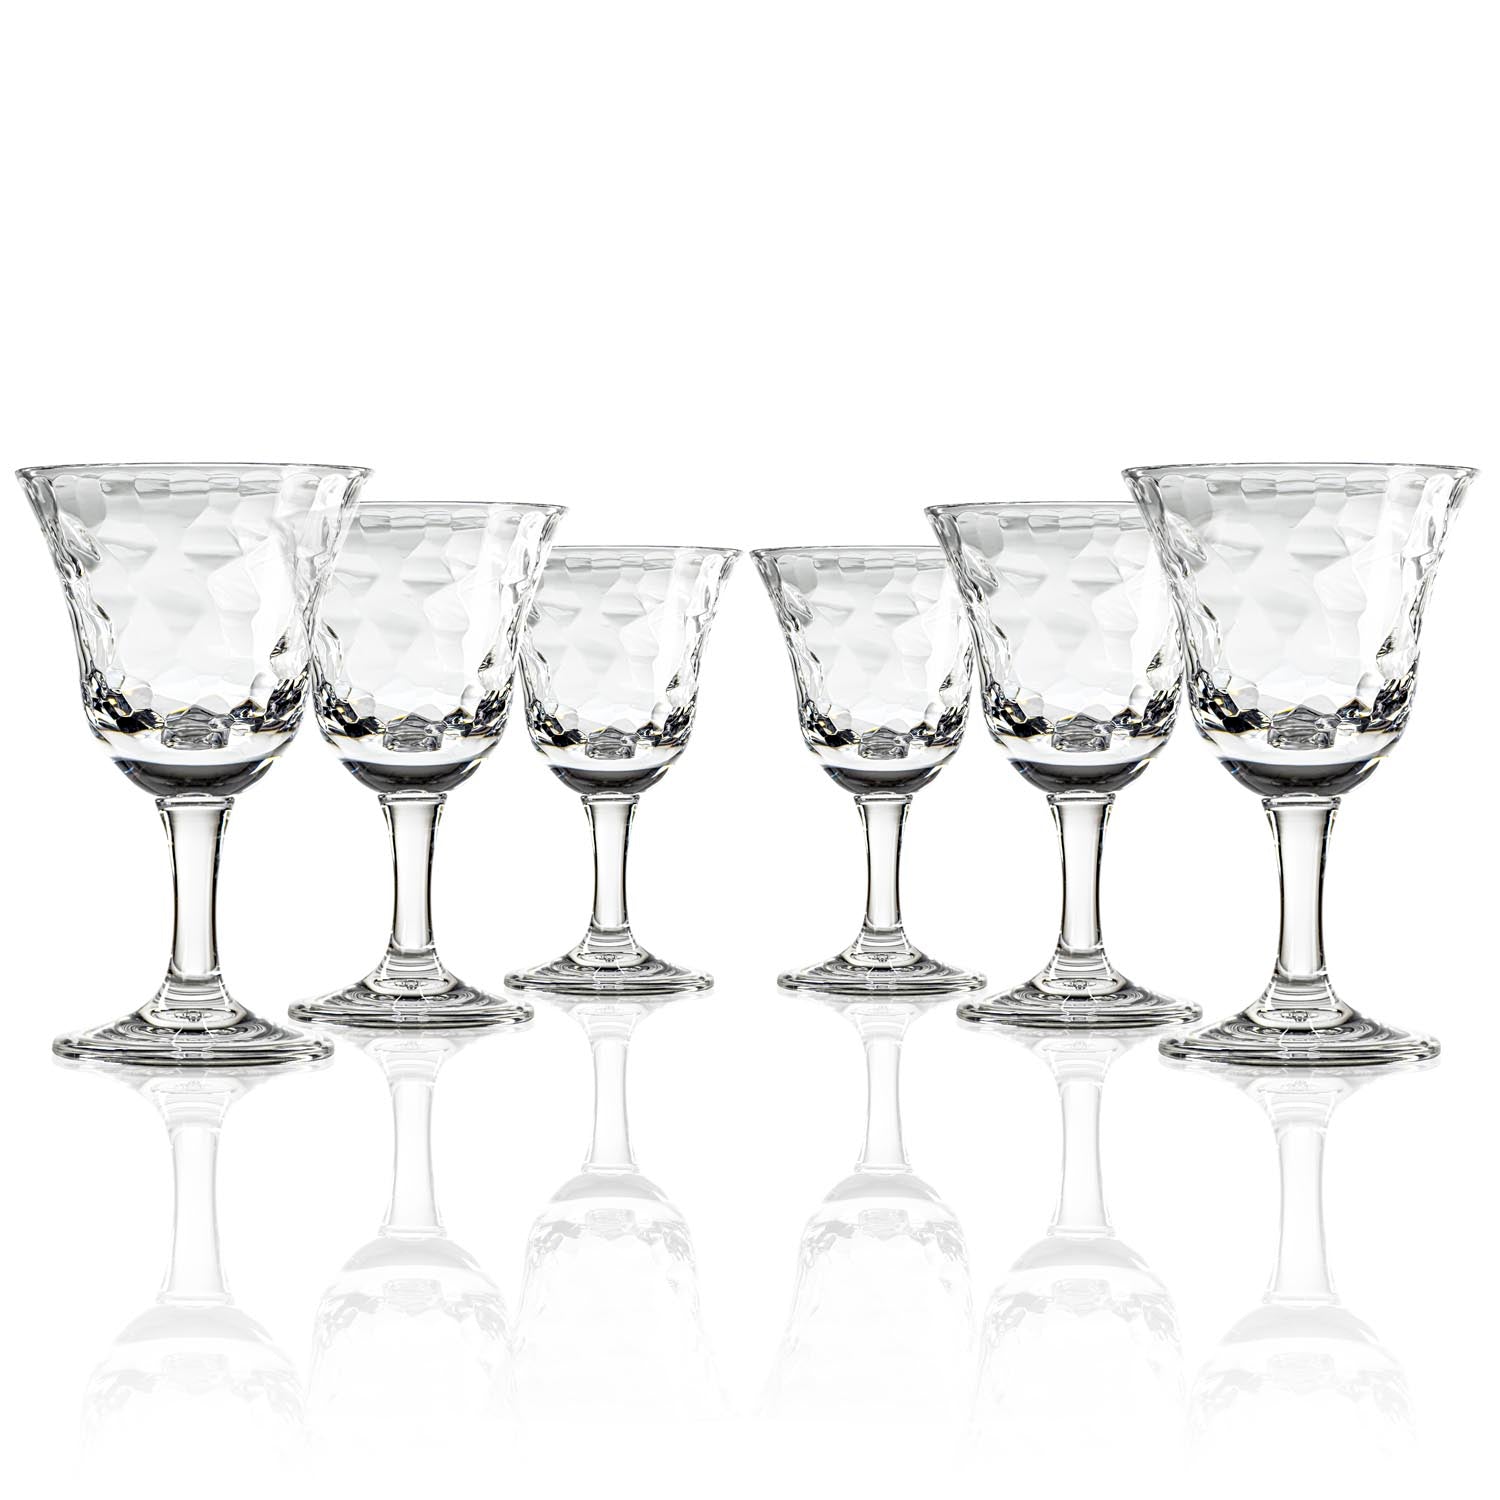 Set of 6, 12-ounce clear acrylic wine glasses from the Merritt Designs Cascade collection. Front view on white background